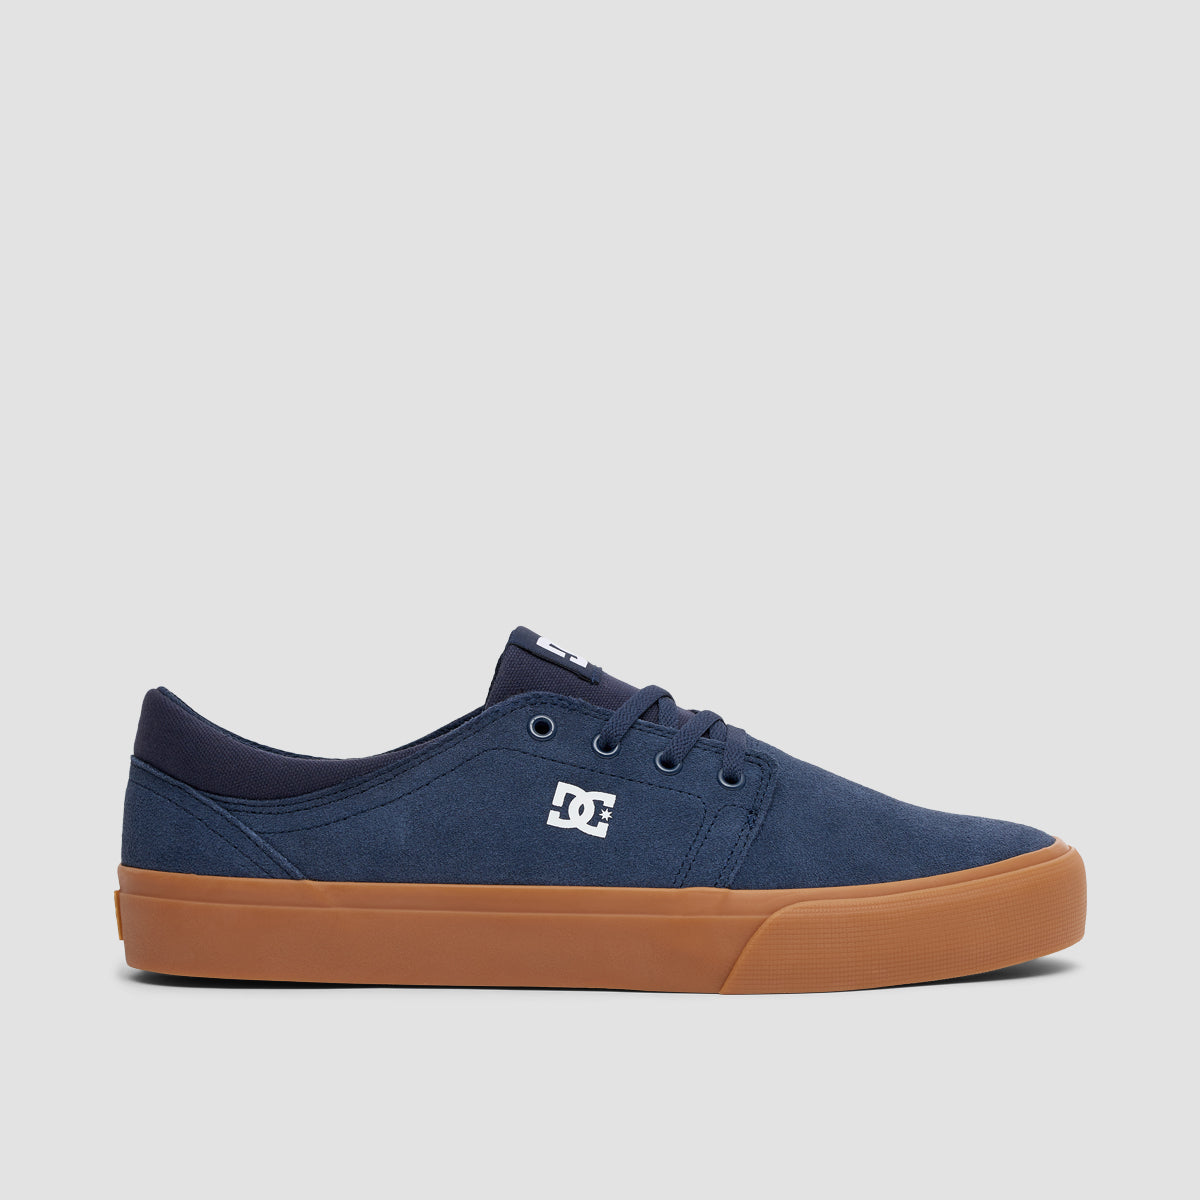 DC Trase SD Shoes - Navy/Gum